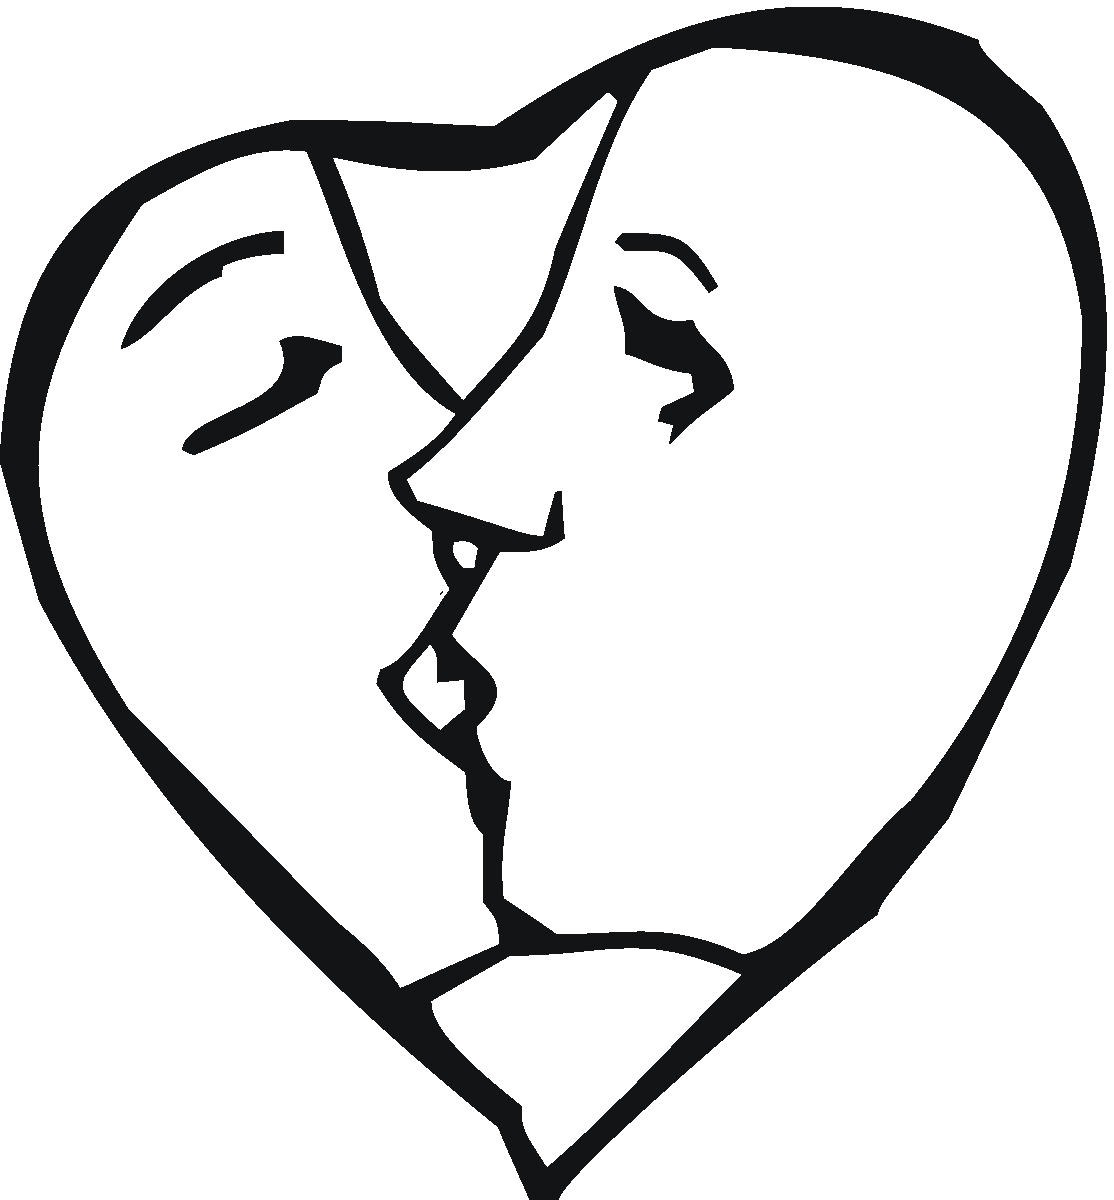 The kissing hand clipart black and white